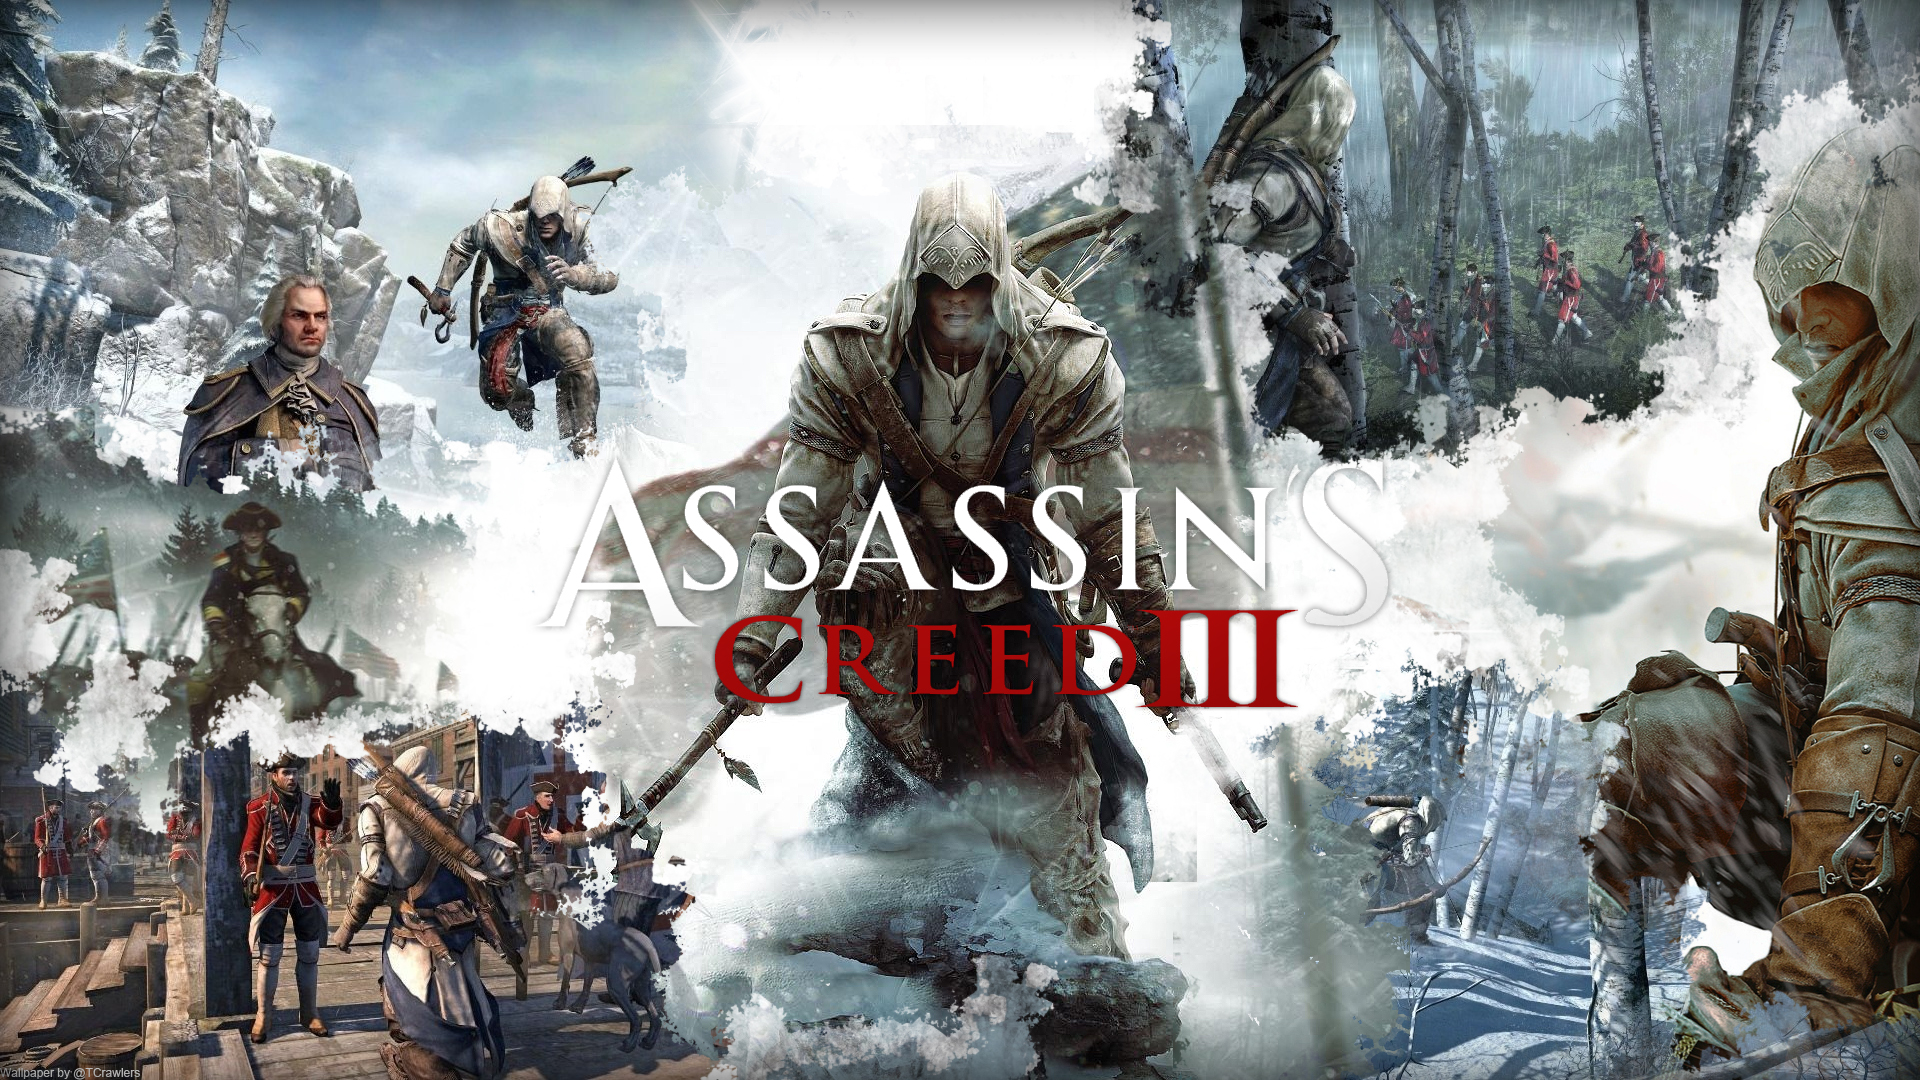 1920x1080 > Assassin's Creed III Wallpapers